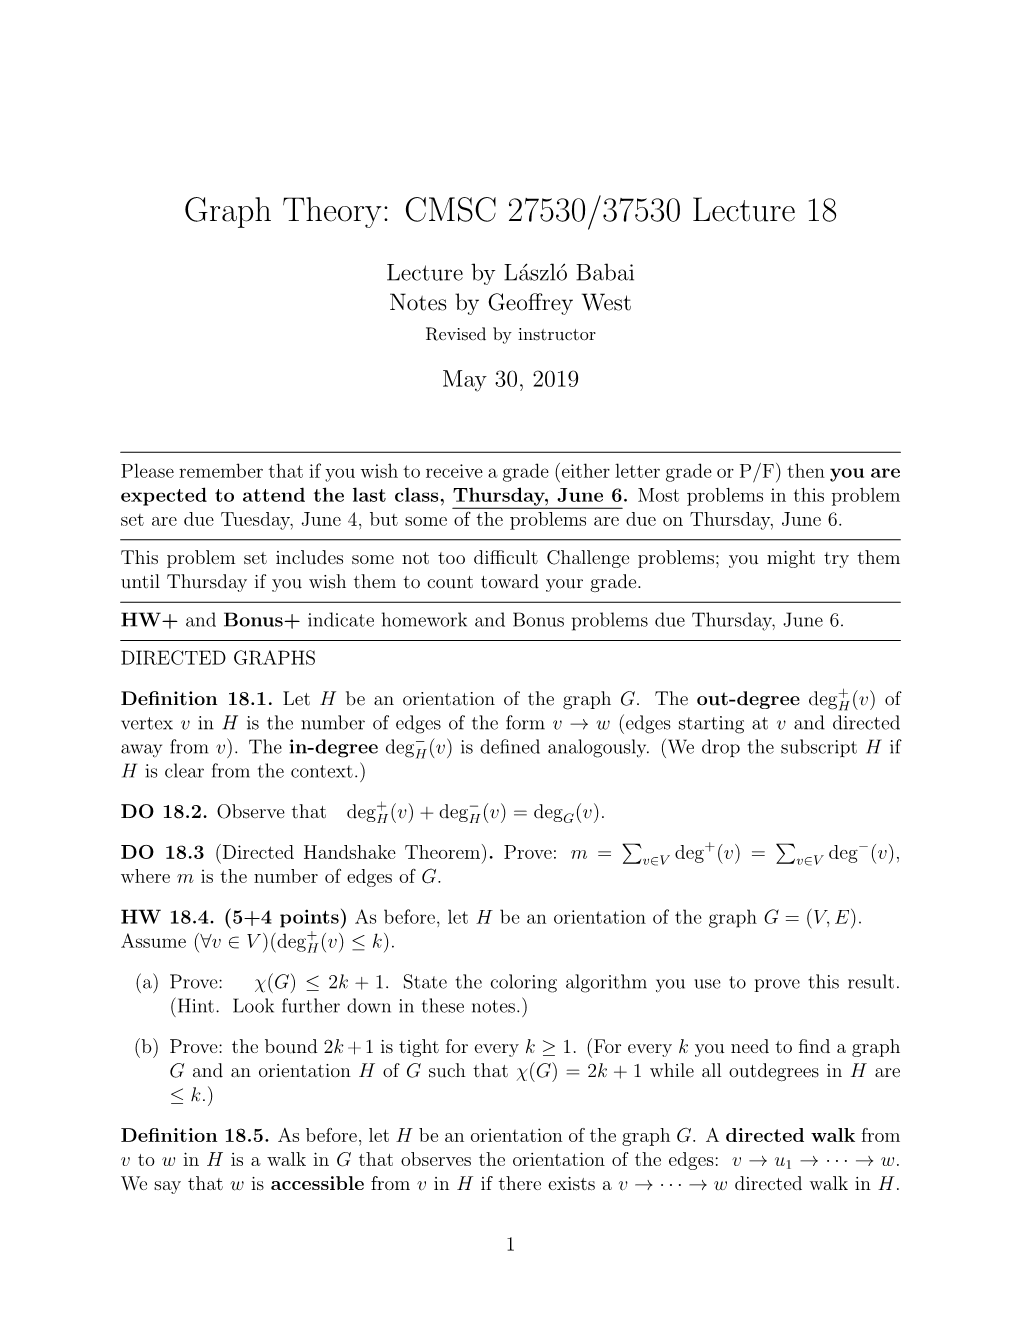 Graph Theory: CMSC 27530/37530 Lecture 18